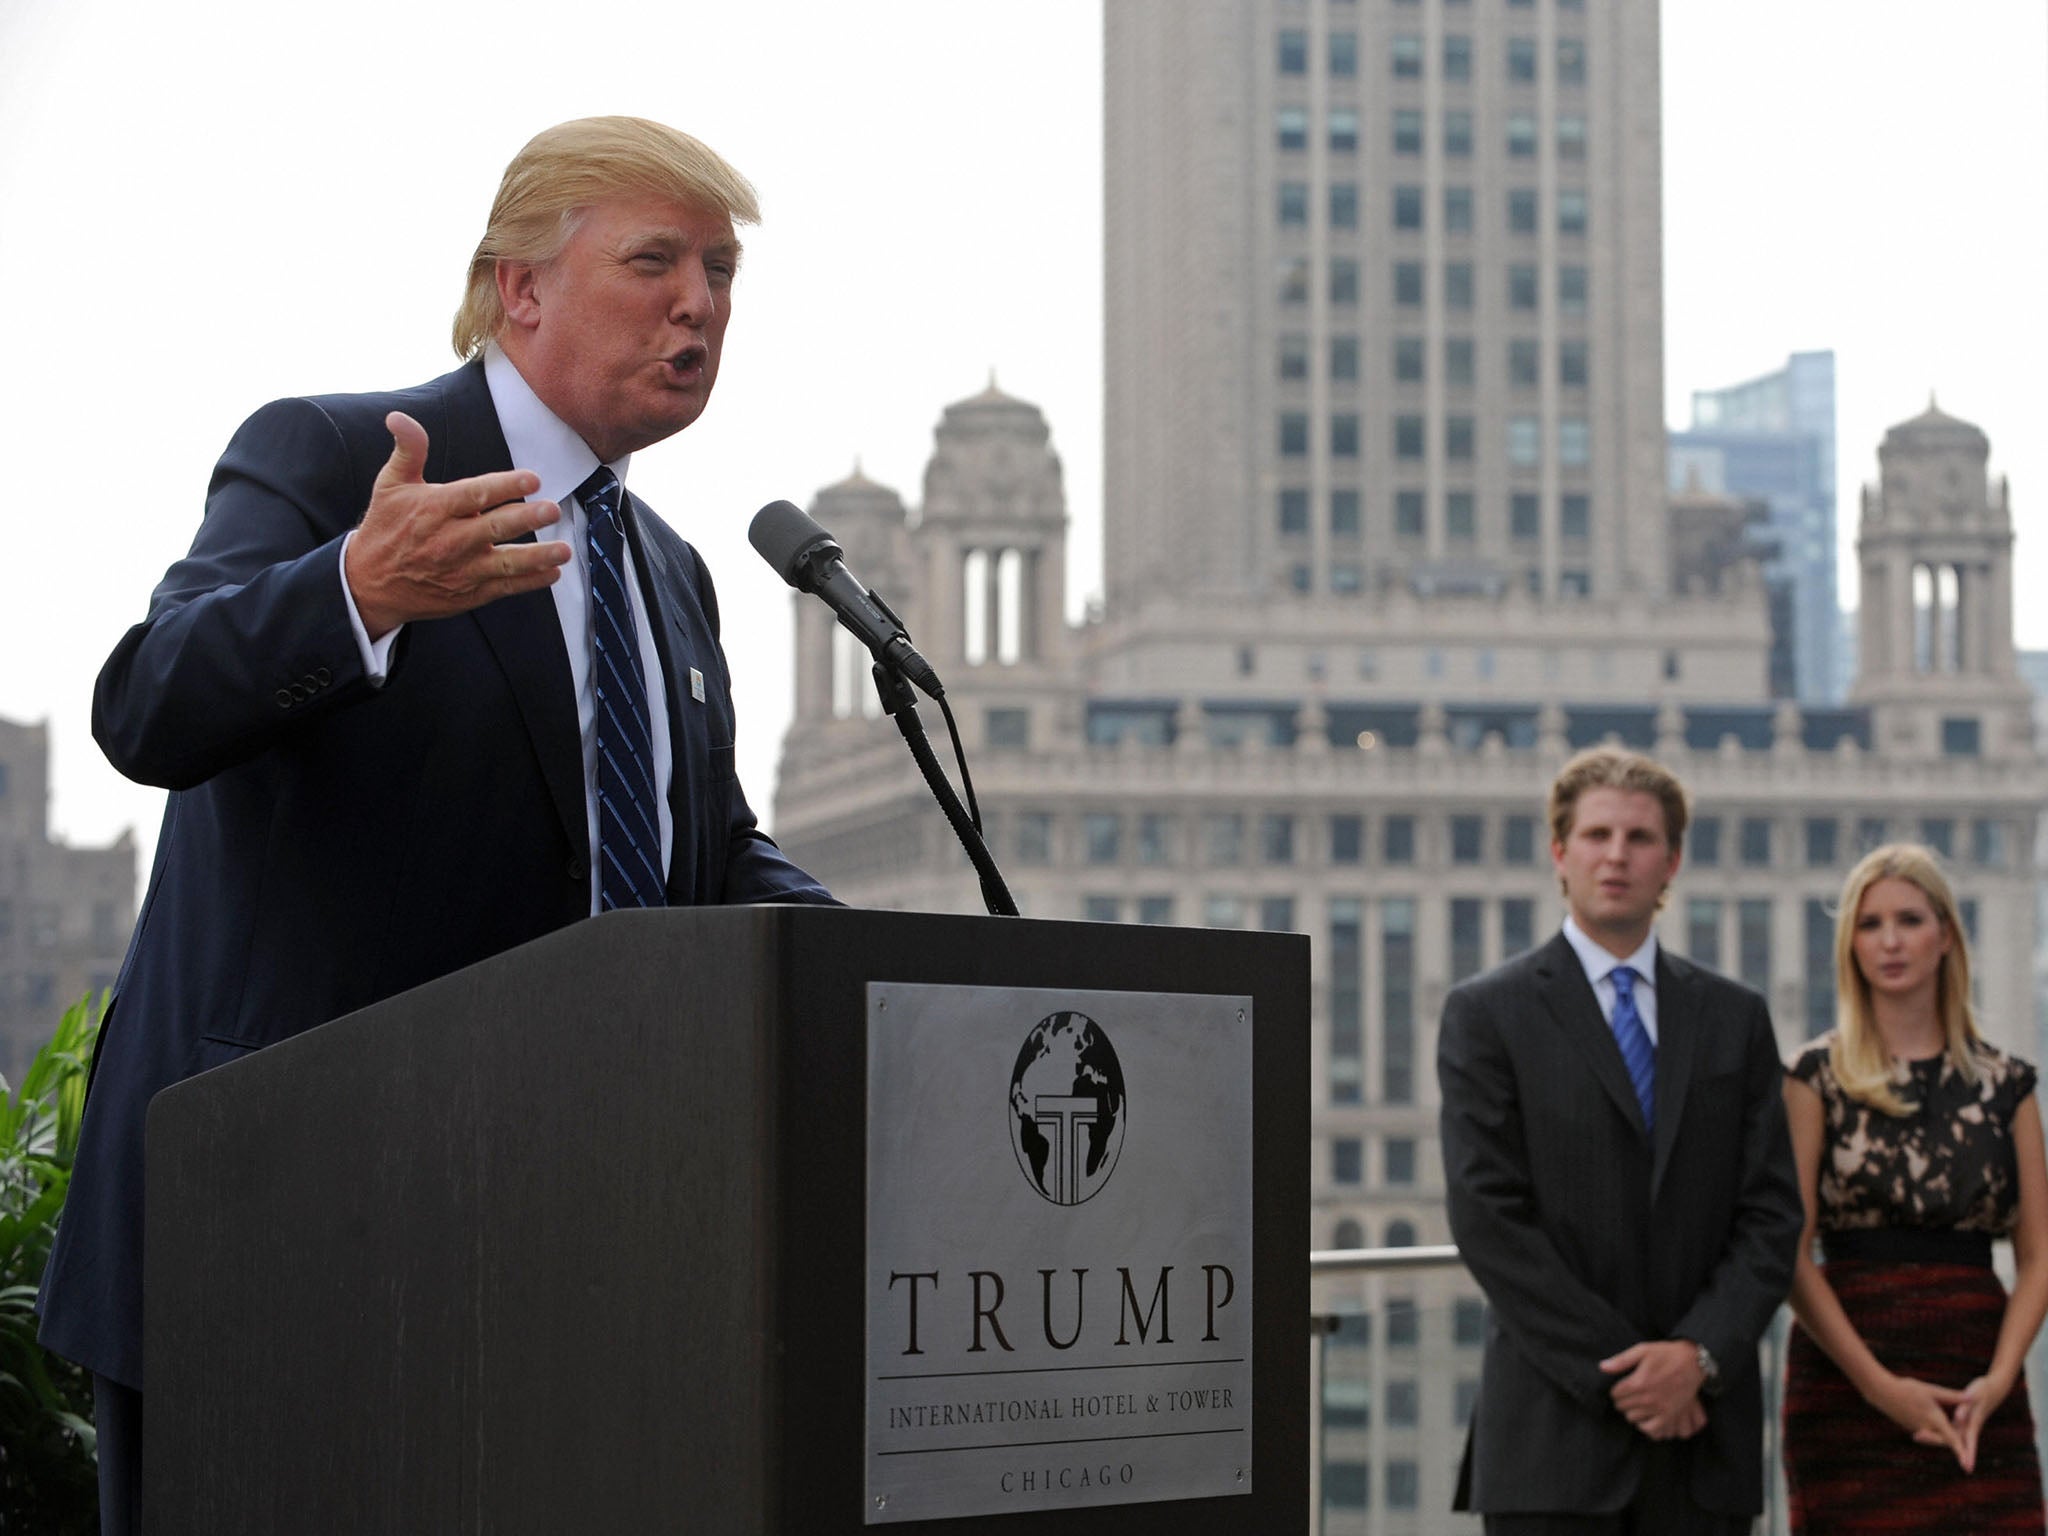 The Supreme Court has refused to hear an appeal from the real estate mogul, seen with children Eric and Ivanka in the background, at a press conference at the Trump International Hotel in Chicago